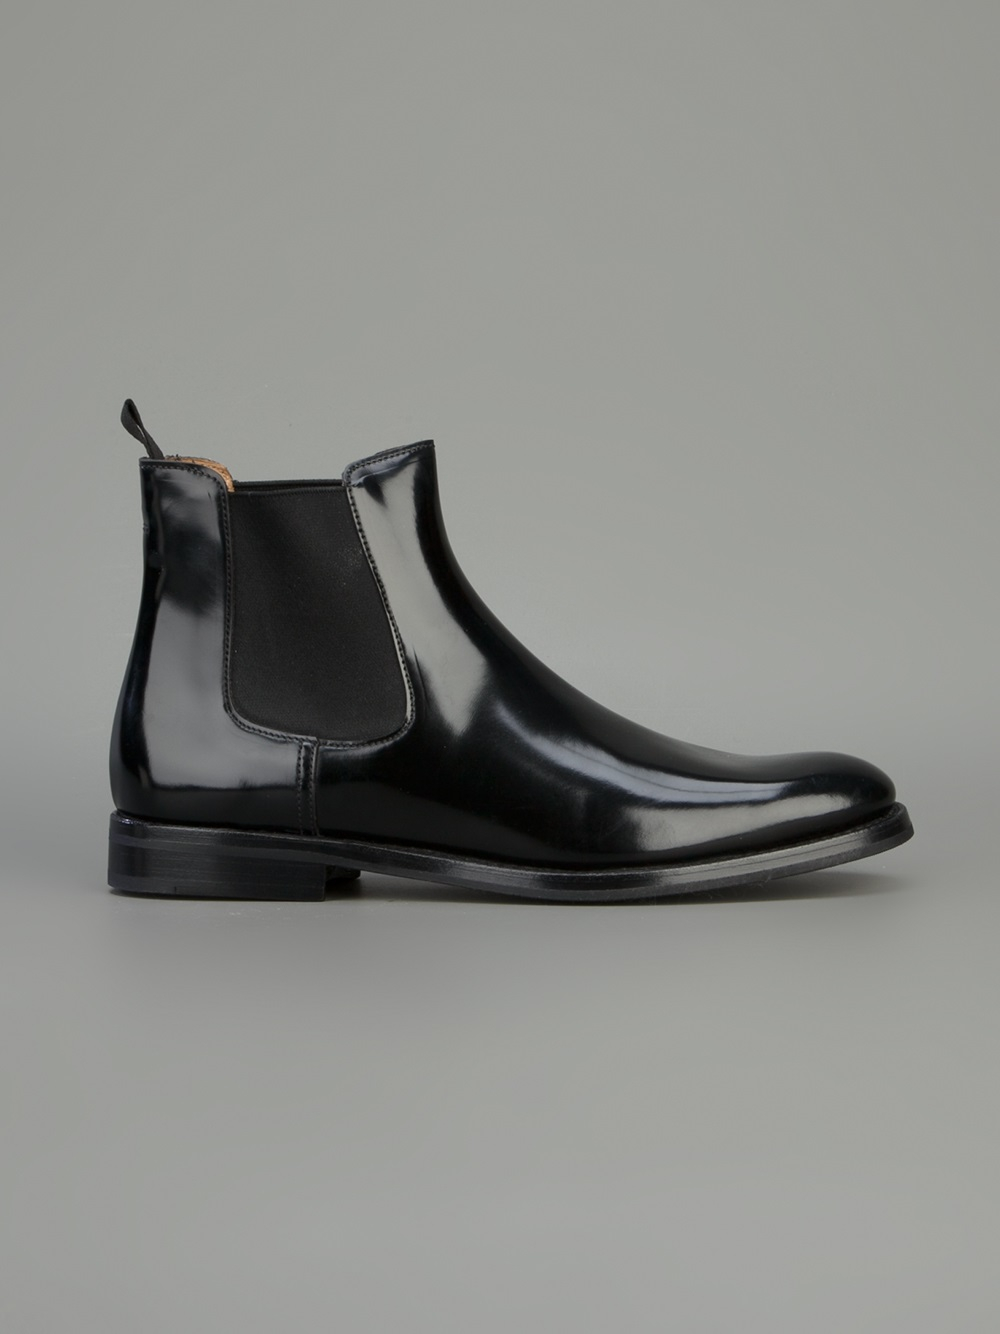 Church's Monmouth Wg Boot in Black - Lyst